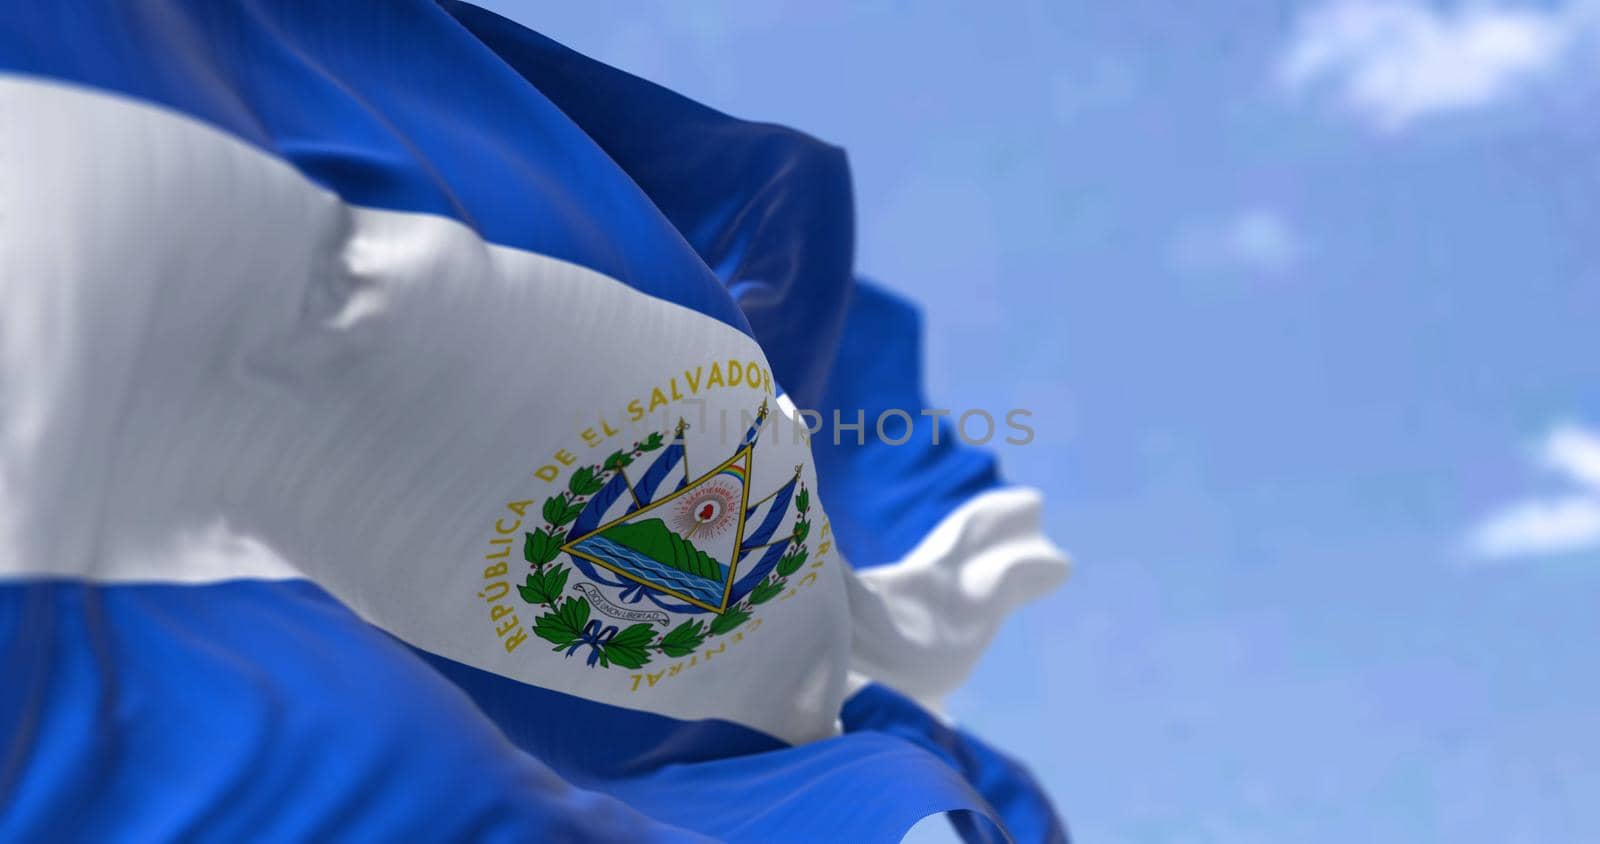 Detail of the national flag of El Salvador waving in the wind on a clear day. El Salvador is a country in Central America. Selective focus.